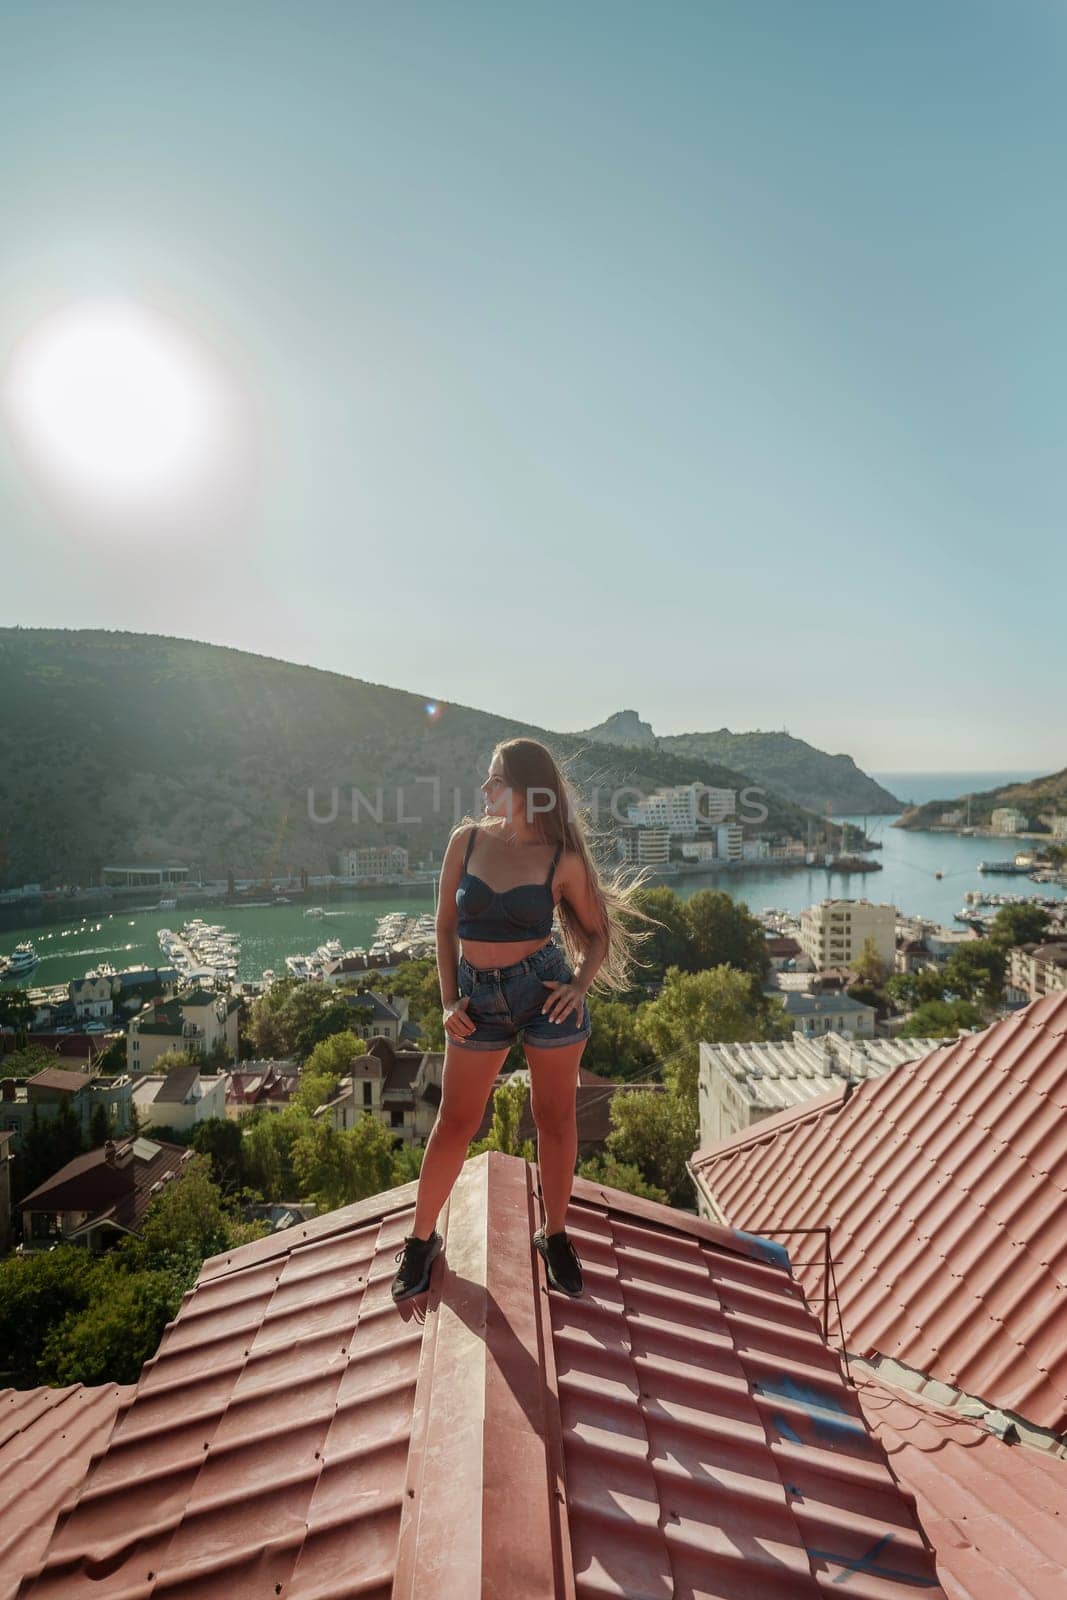 Woman standing on rooftop, enjoys town view and sea mountains. Peaceful rooftop relaxation. Below her, there is a town with several boats visible in the water. Rooftop vantage point